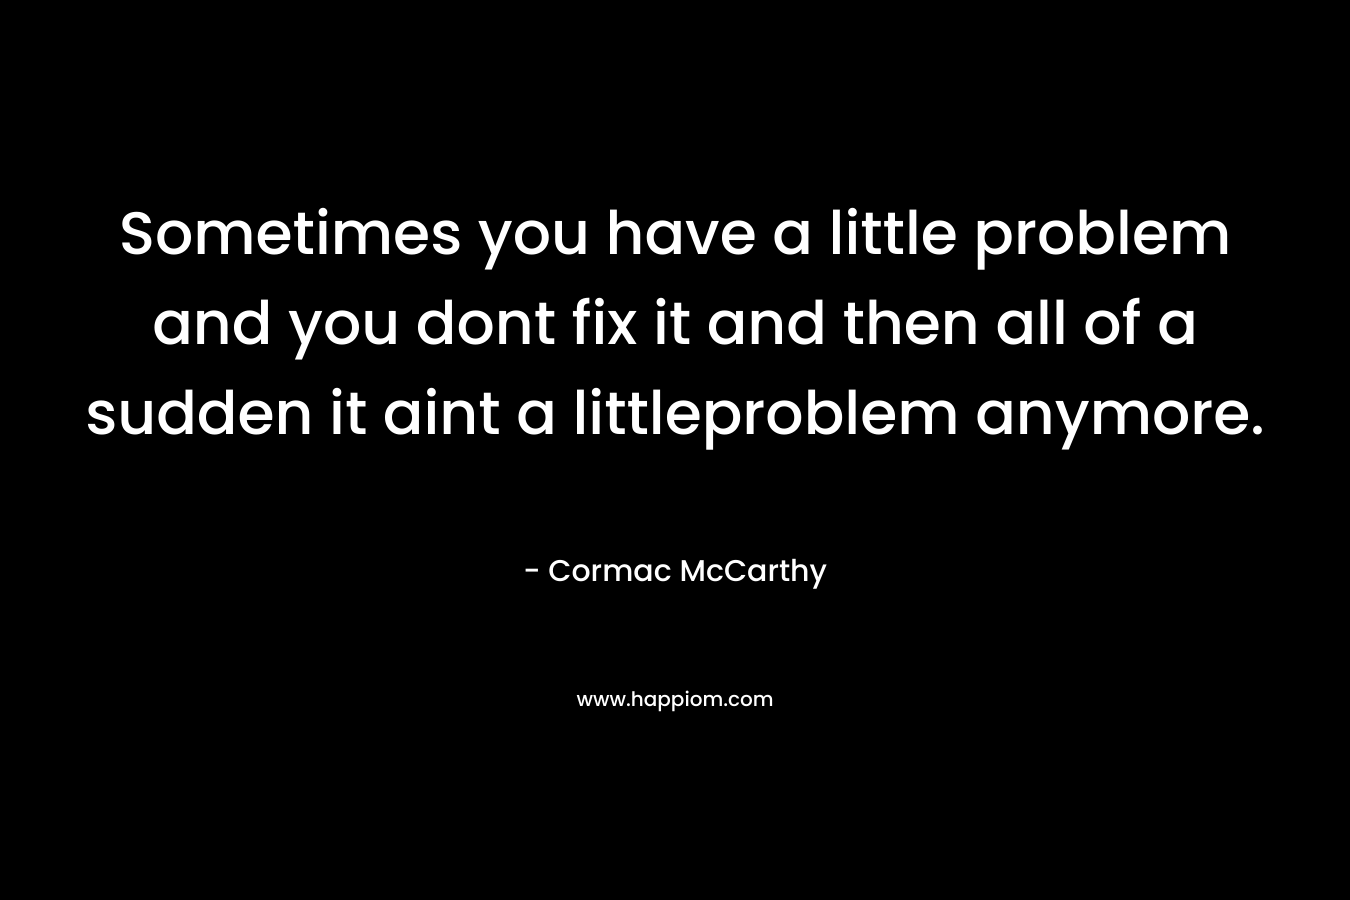 Sometimes you have a little problem and you dont fix it and then all of a sudden it aint a littleproblem anymore.